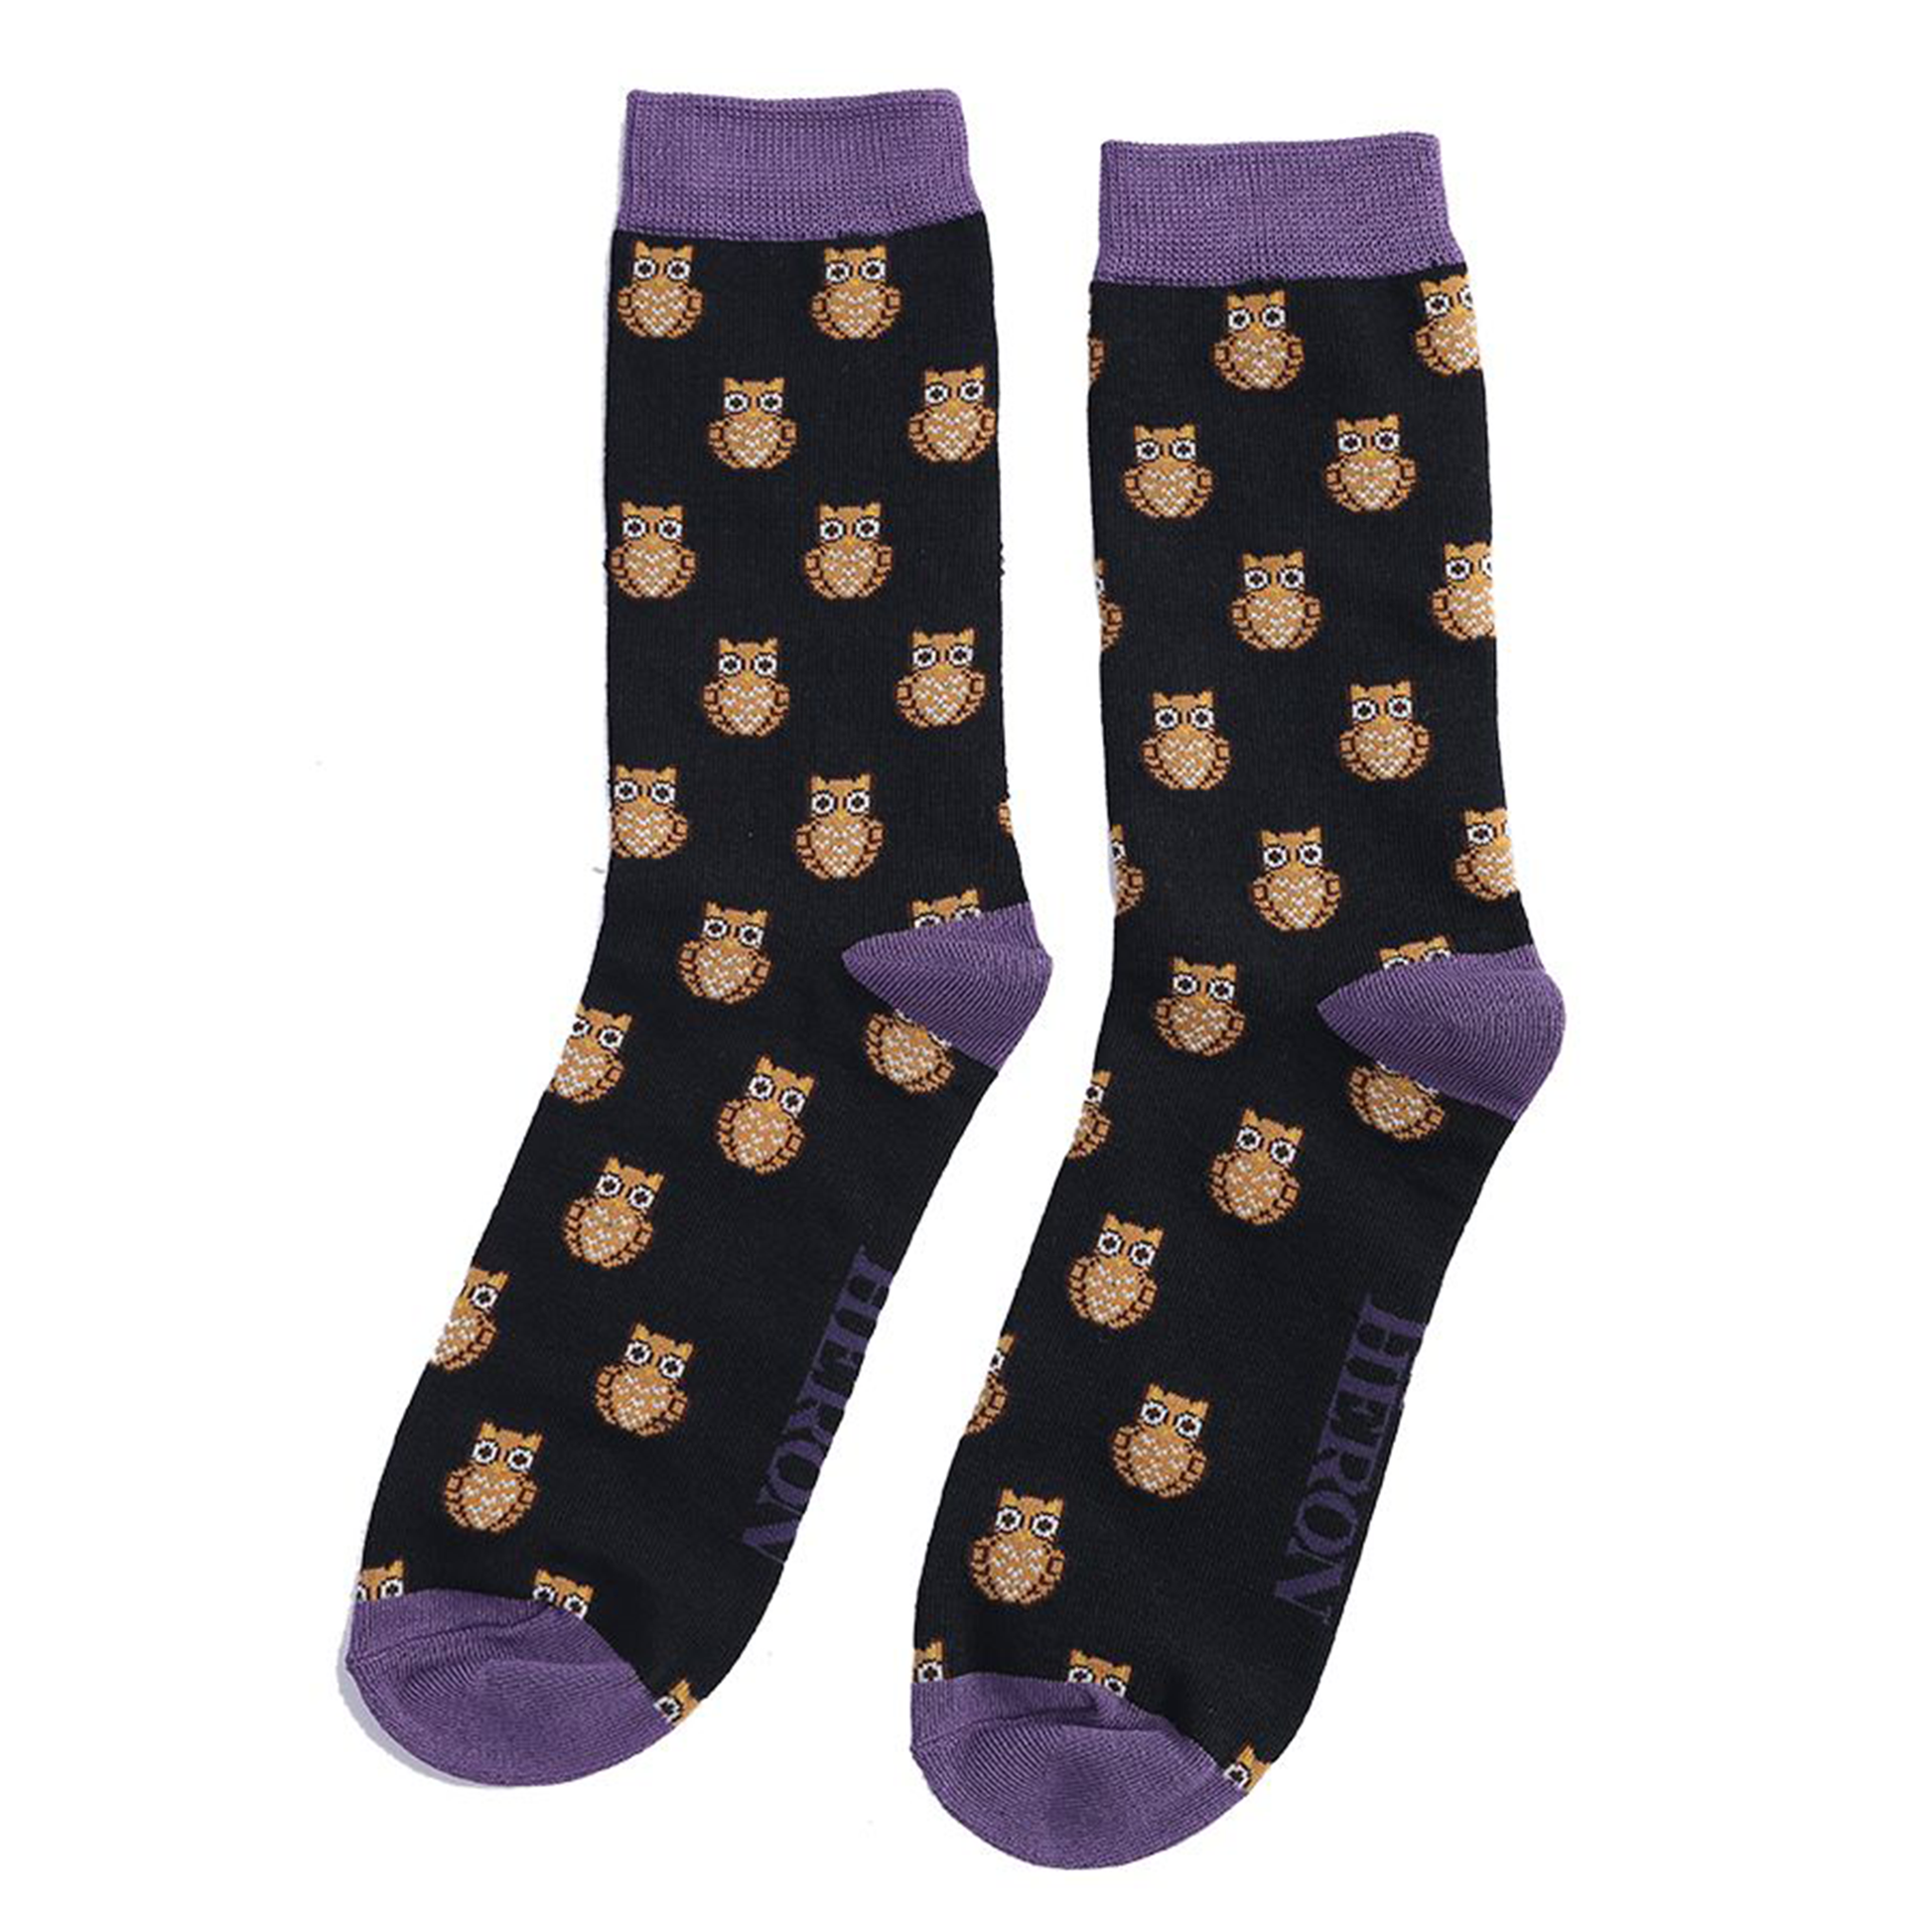 black and purple socks with brown owls on them